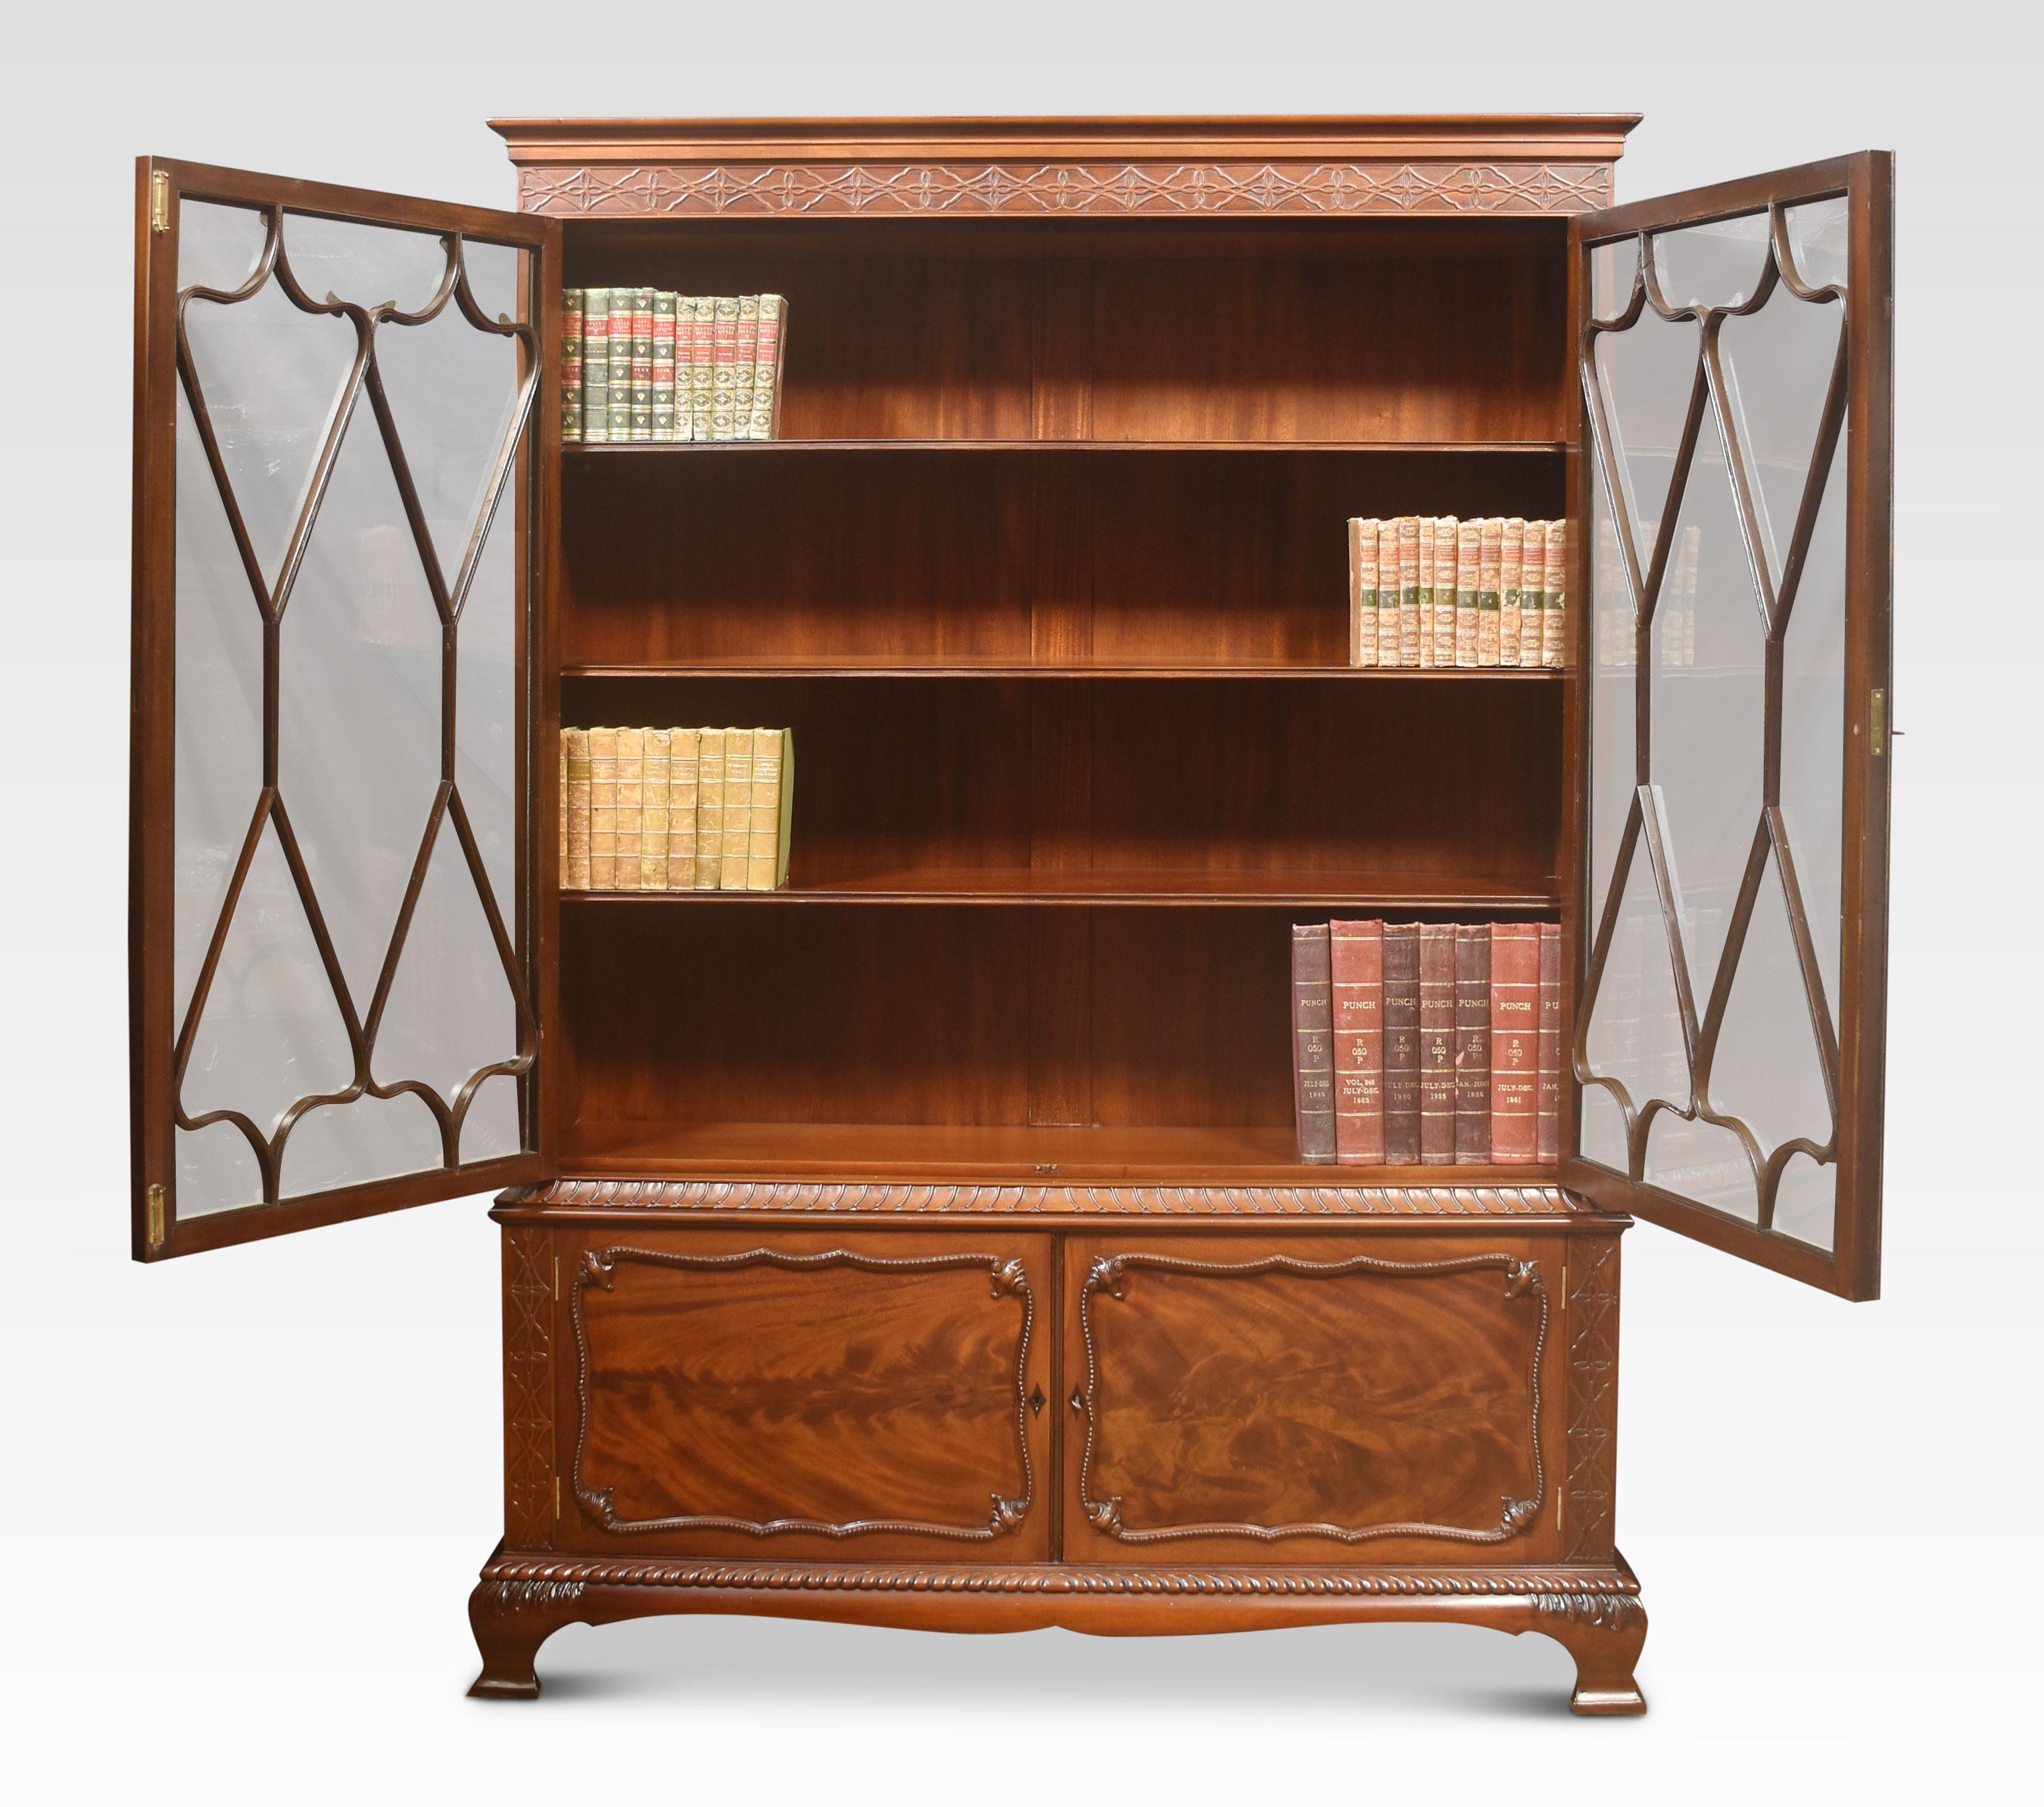 Chippendale Revival mahogany bookcase, the molded cornice, and blind fretwork frieze. Above two astragal glazed doors opening to reveal an adjustable shelved interior. The base section is fitted with two flame mahogany paneled doors, all raised up